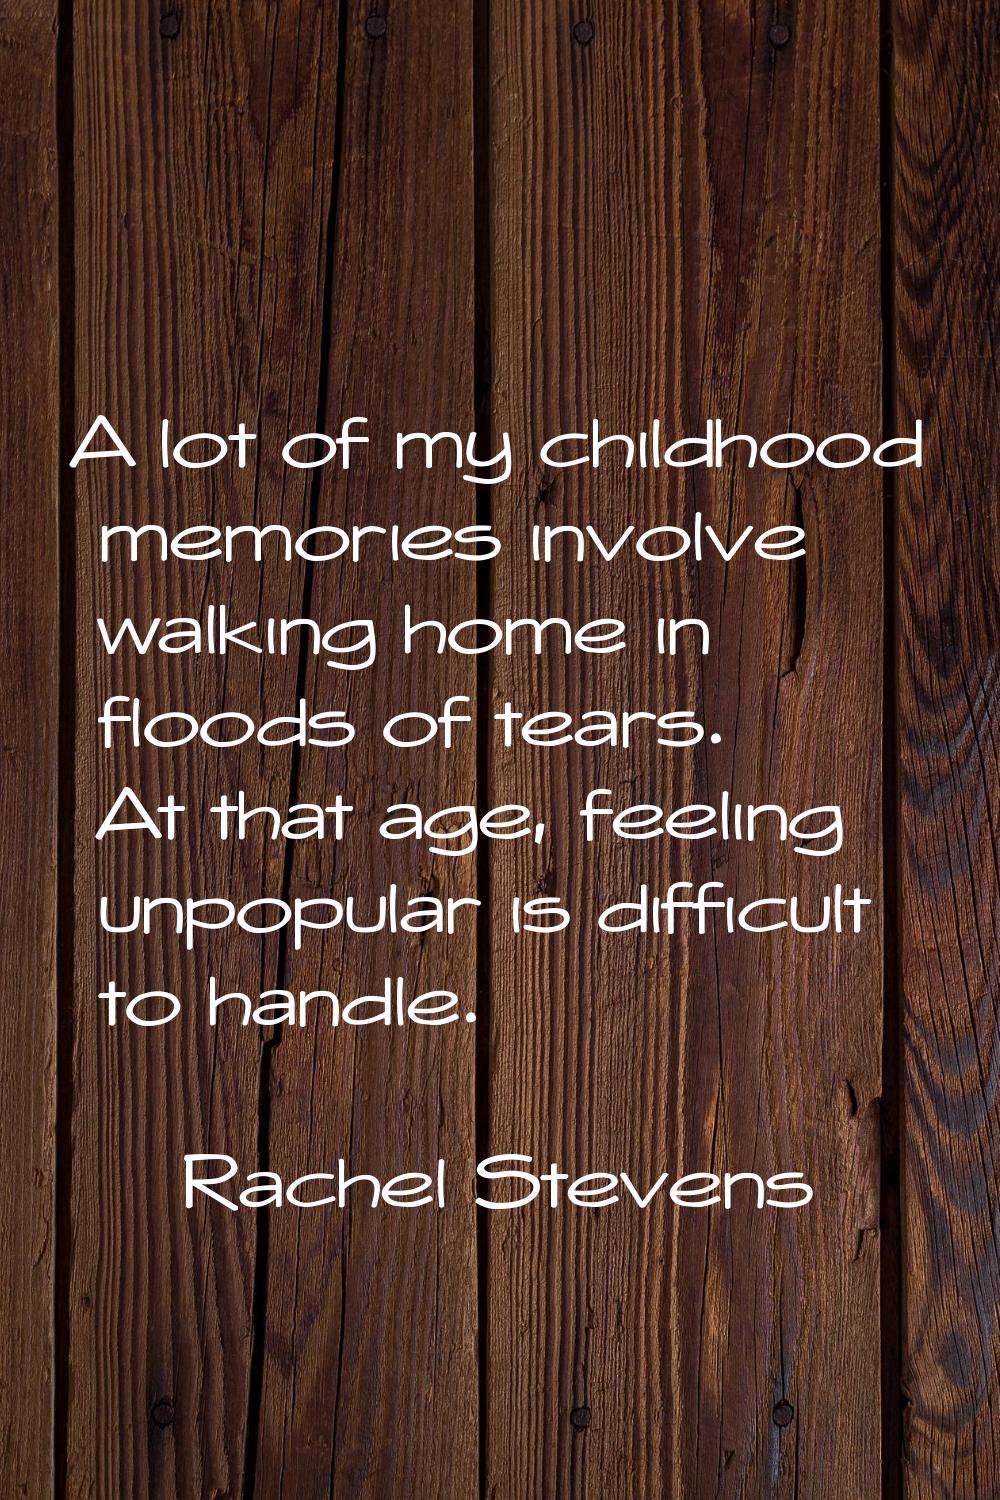 A lot of my childhood memories involve walking home in floods of tears. At that age, feeling unpopu